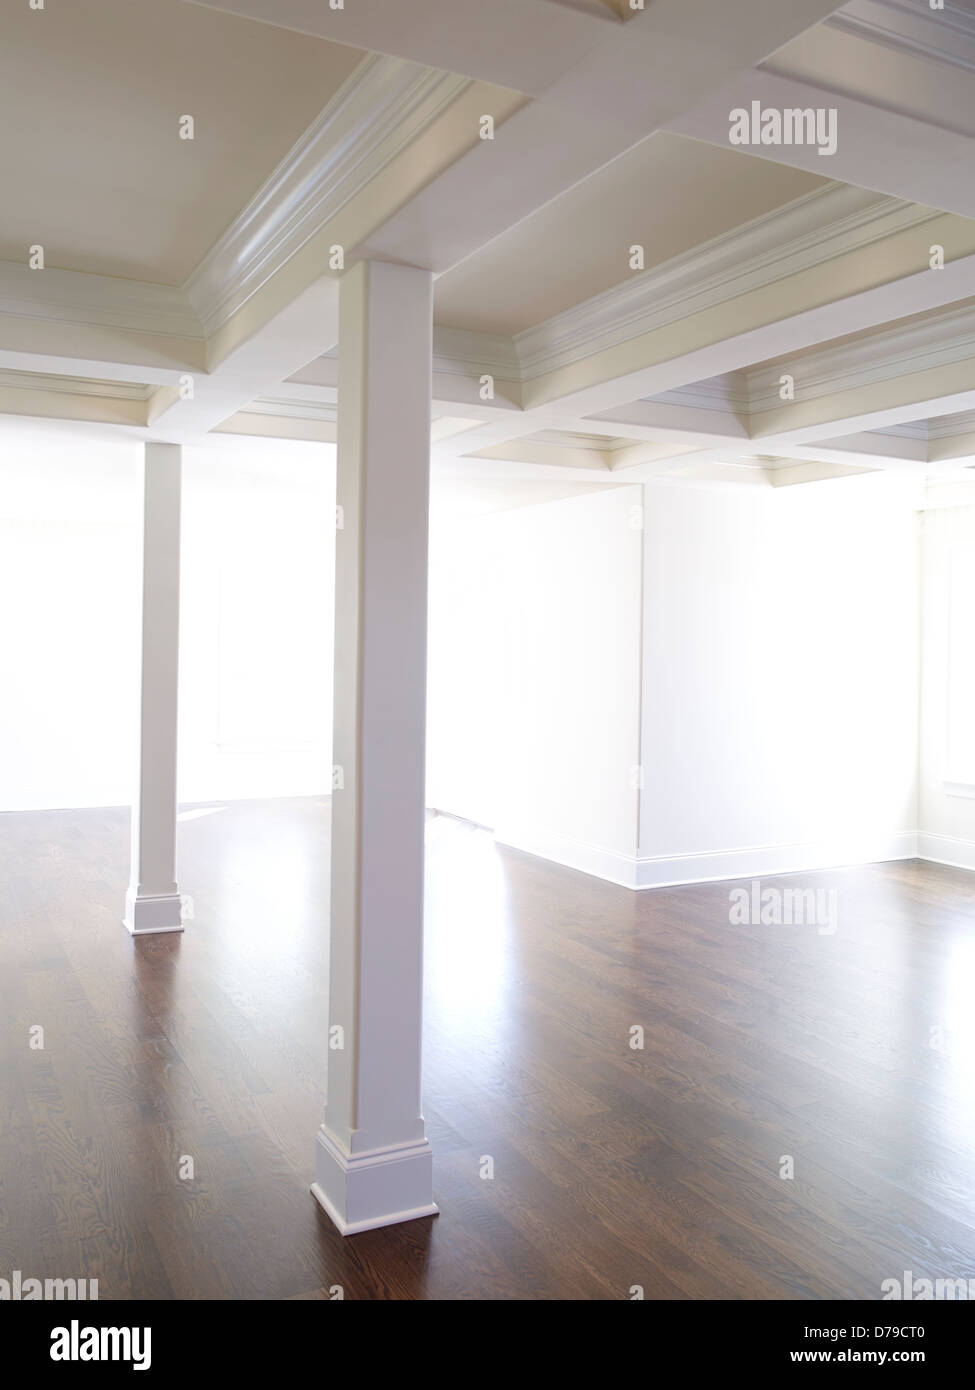 Bright White Room With Columns Stock Photo